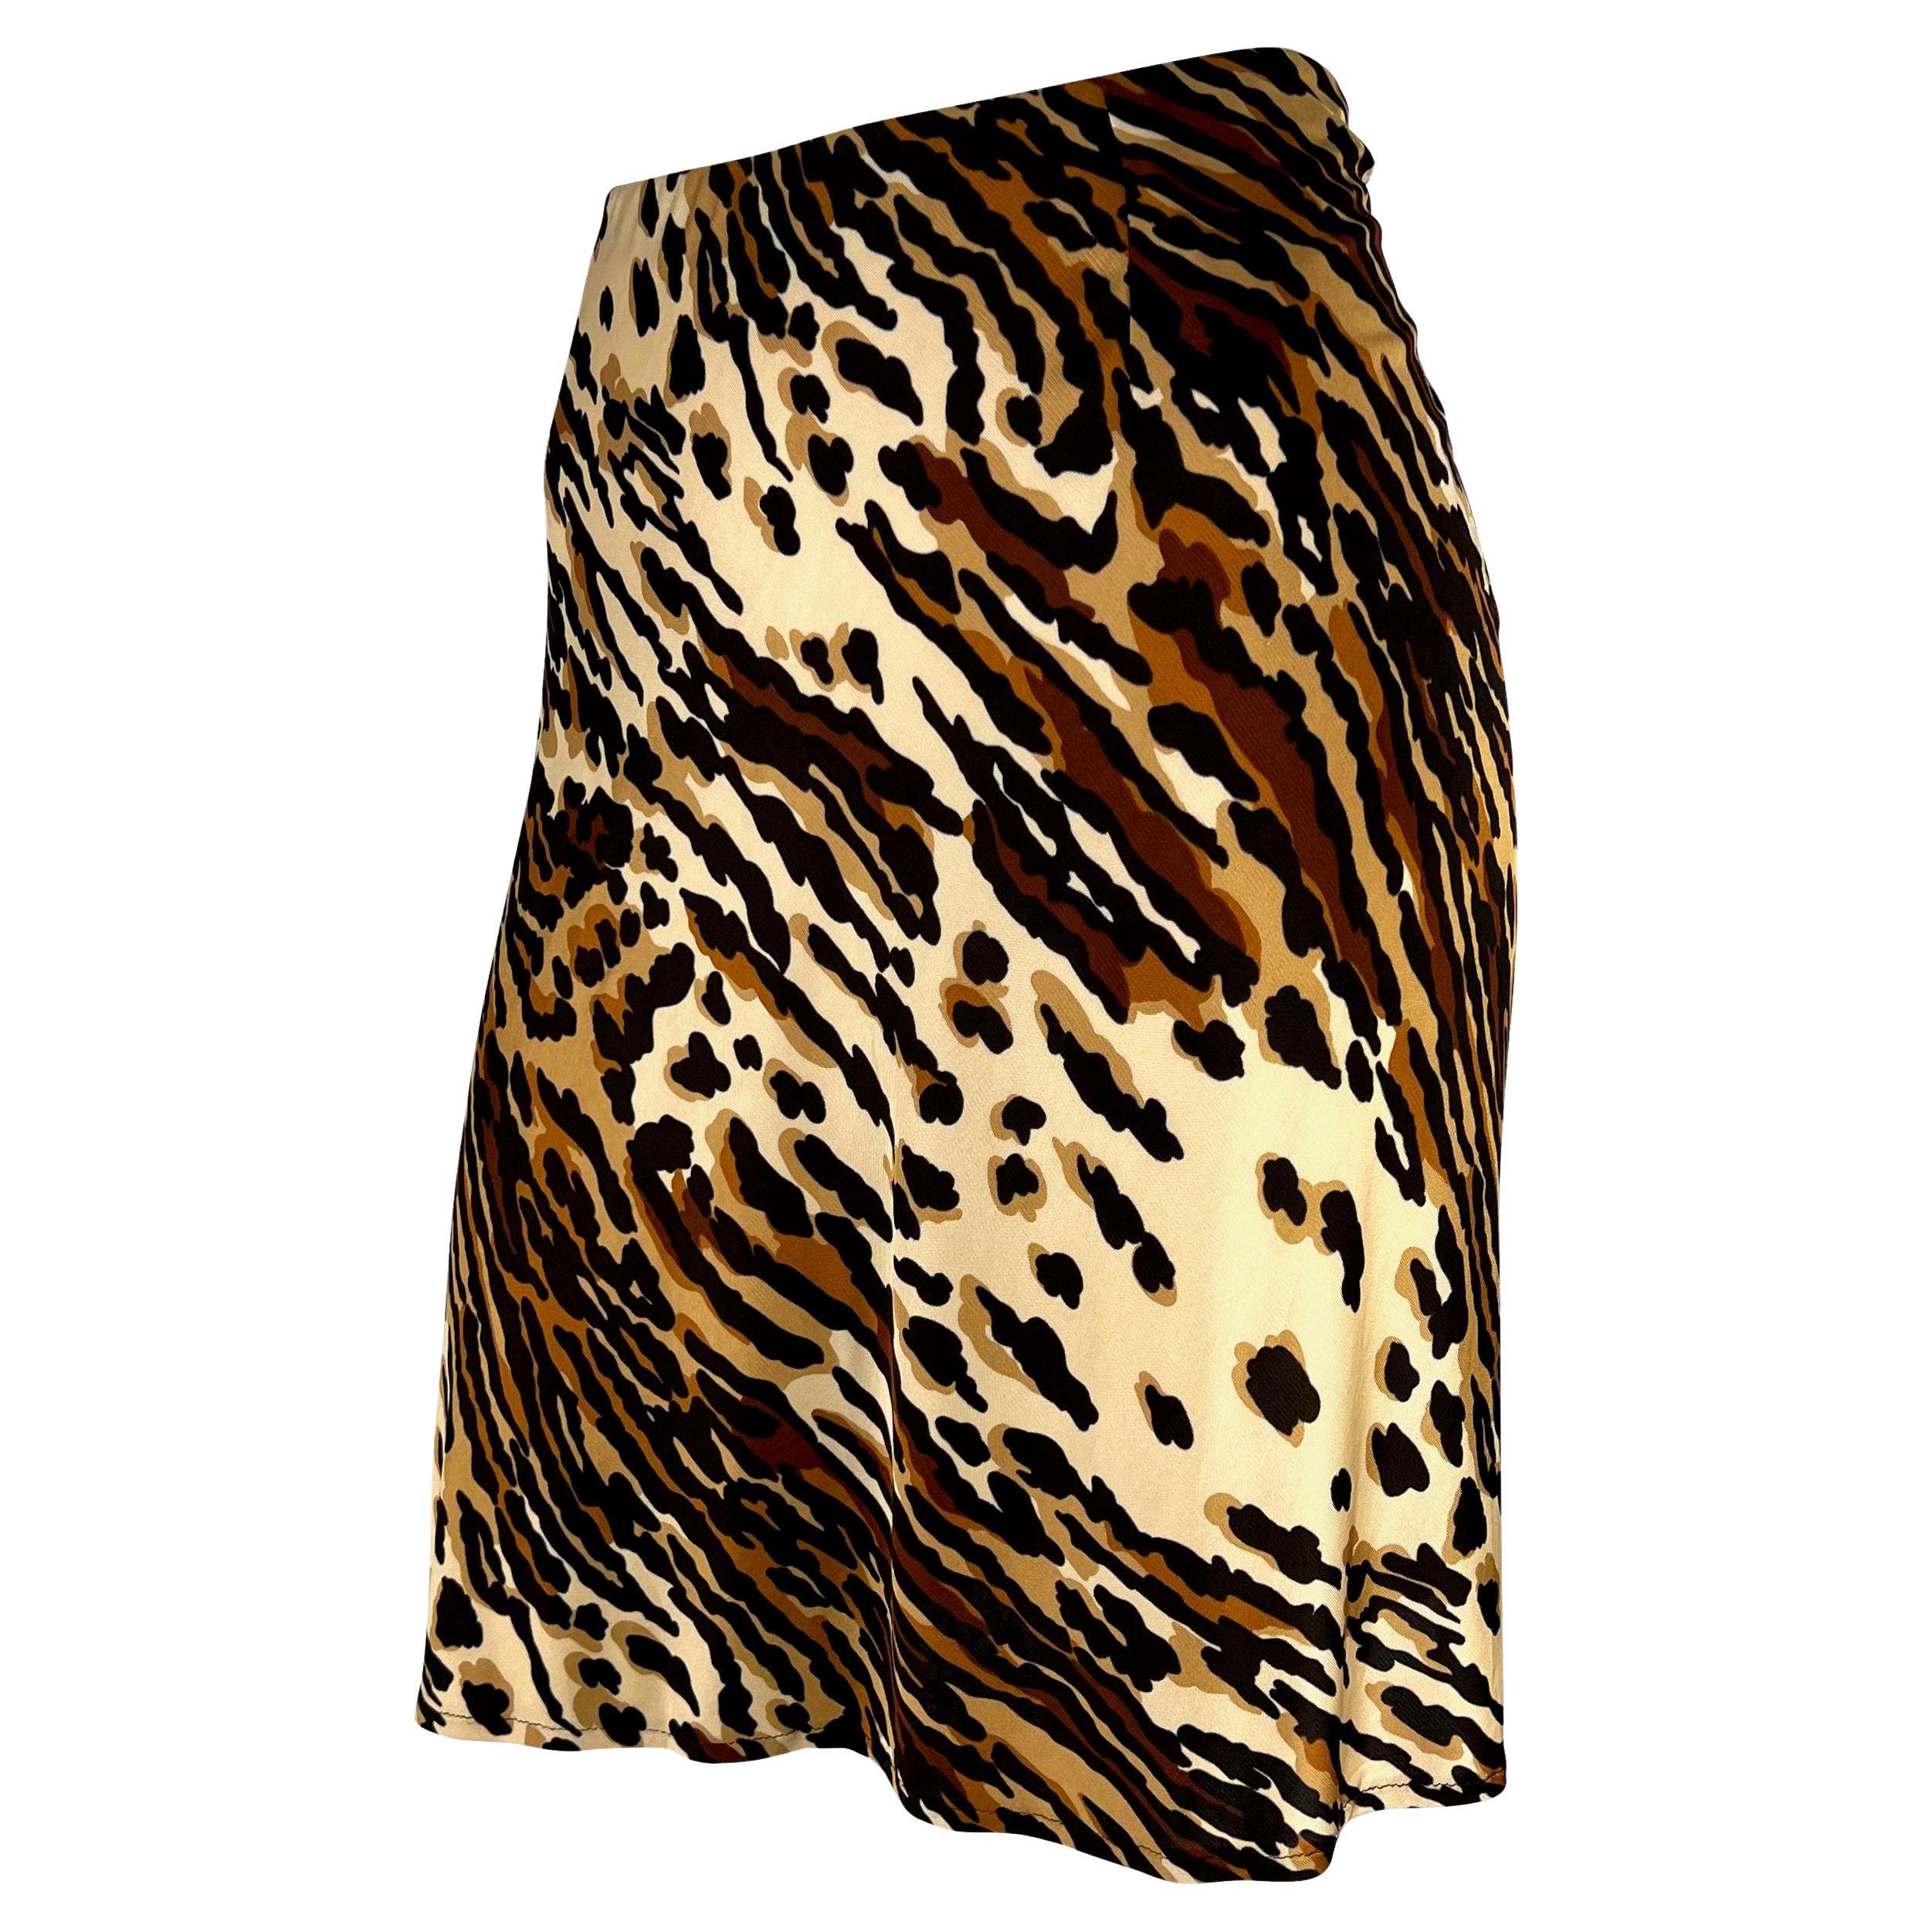 Presenting a cheetah print Dolce and Gabbana skirt. From the 1990s, this viscose skirt features a bold abstract cheetah print. Never before worn, this skirt is made complete with the original tags from over 20 years ago!  

Approximate